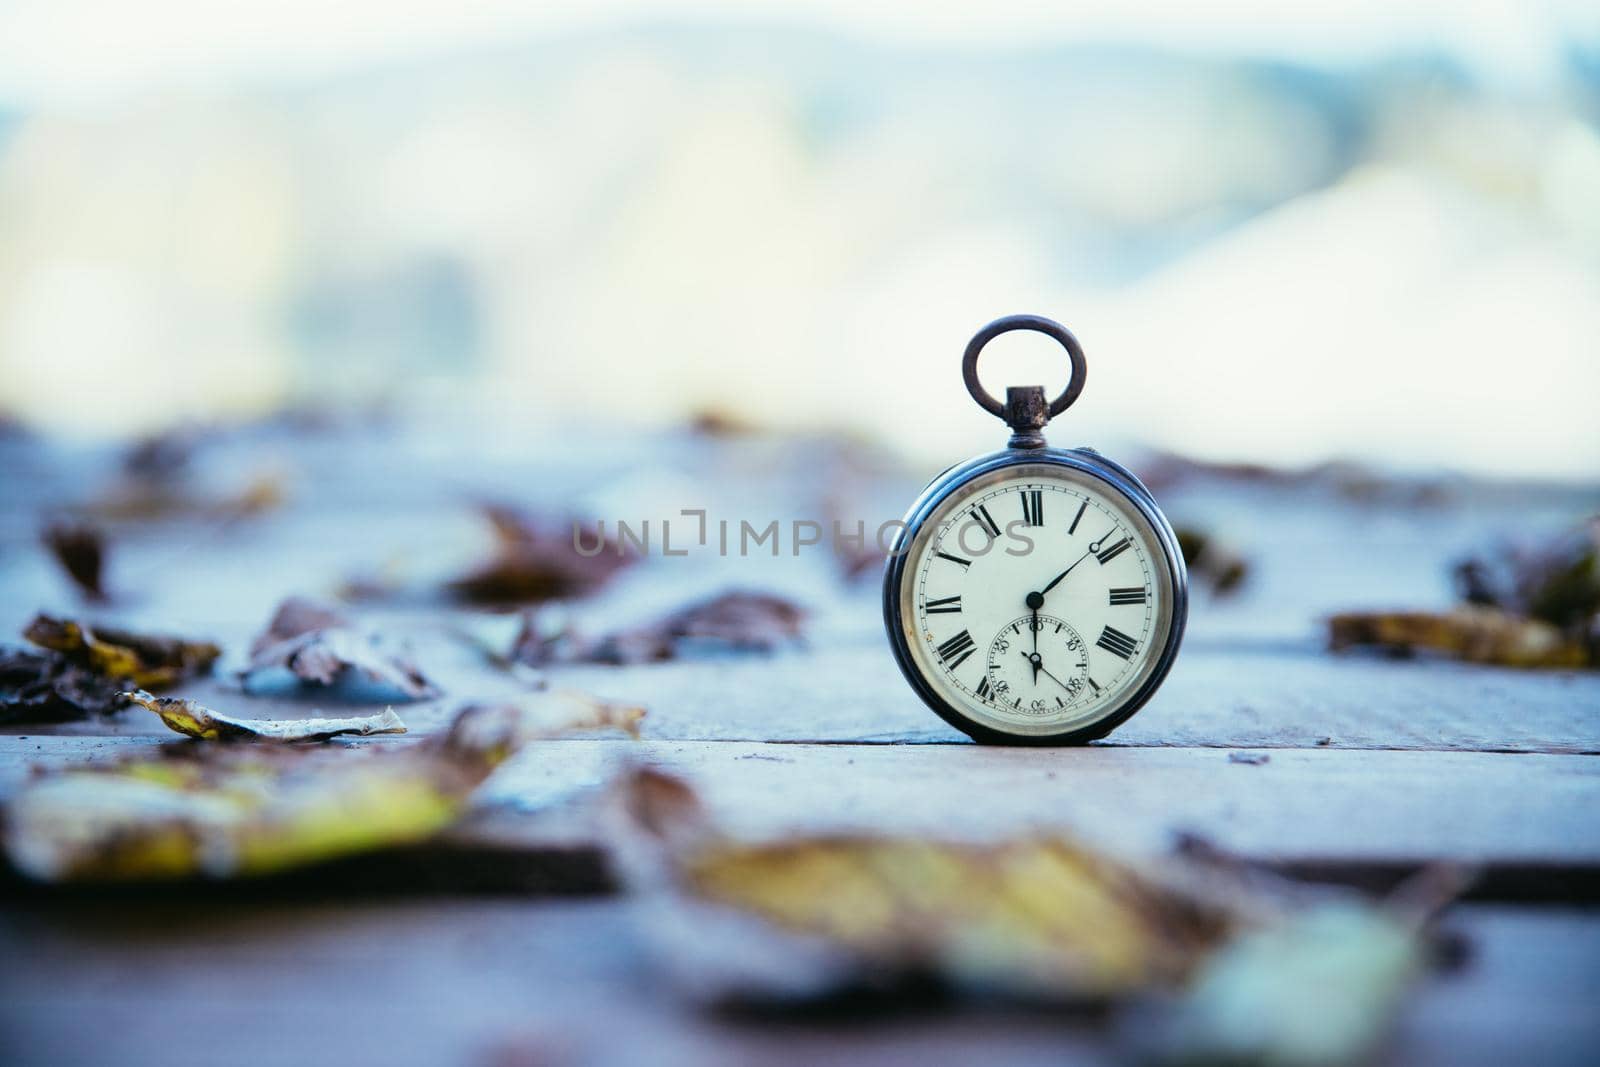 Time goes by: vintage watch outdoors; wood and leaves; by Daxenbichler